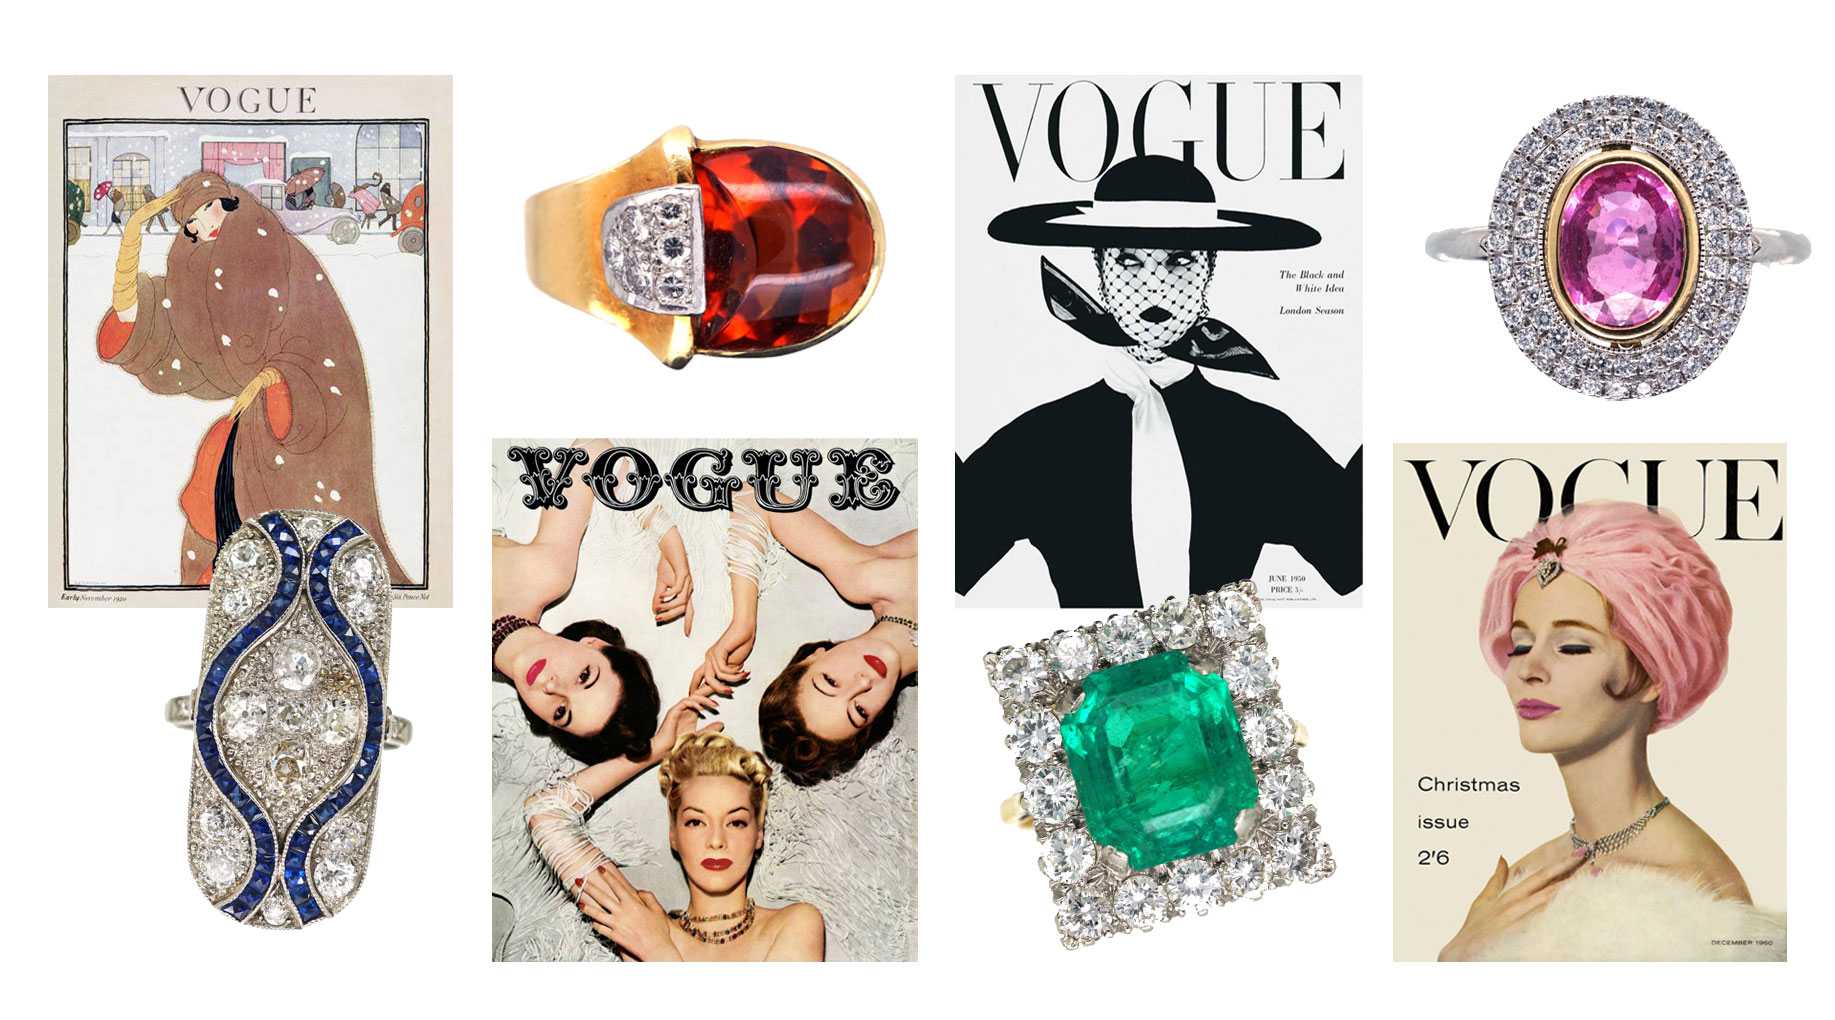 Vogue magazine covers from the Art Deco time